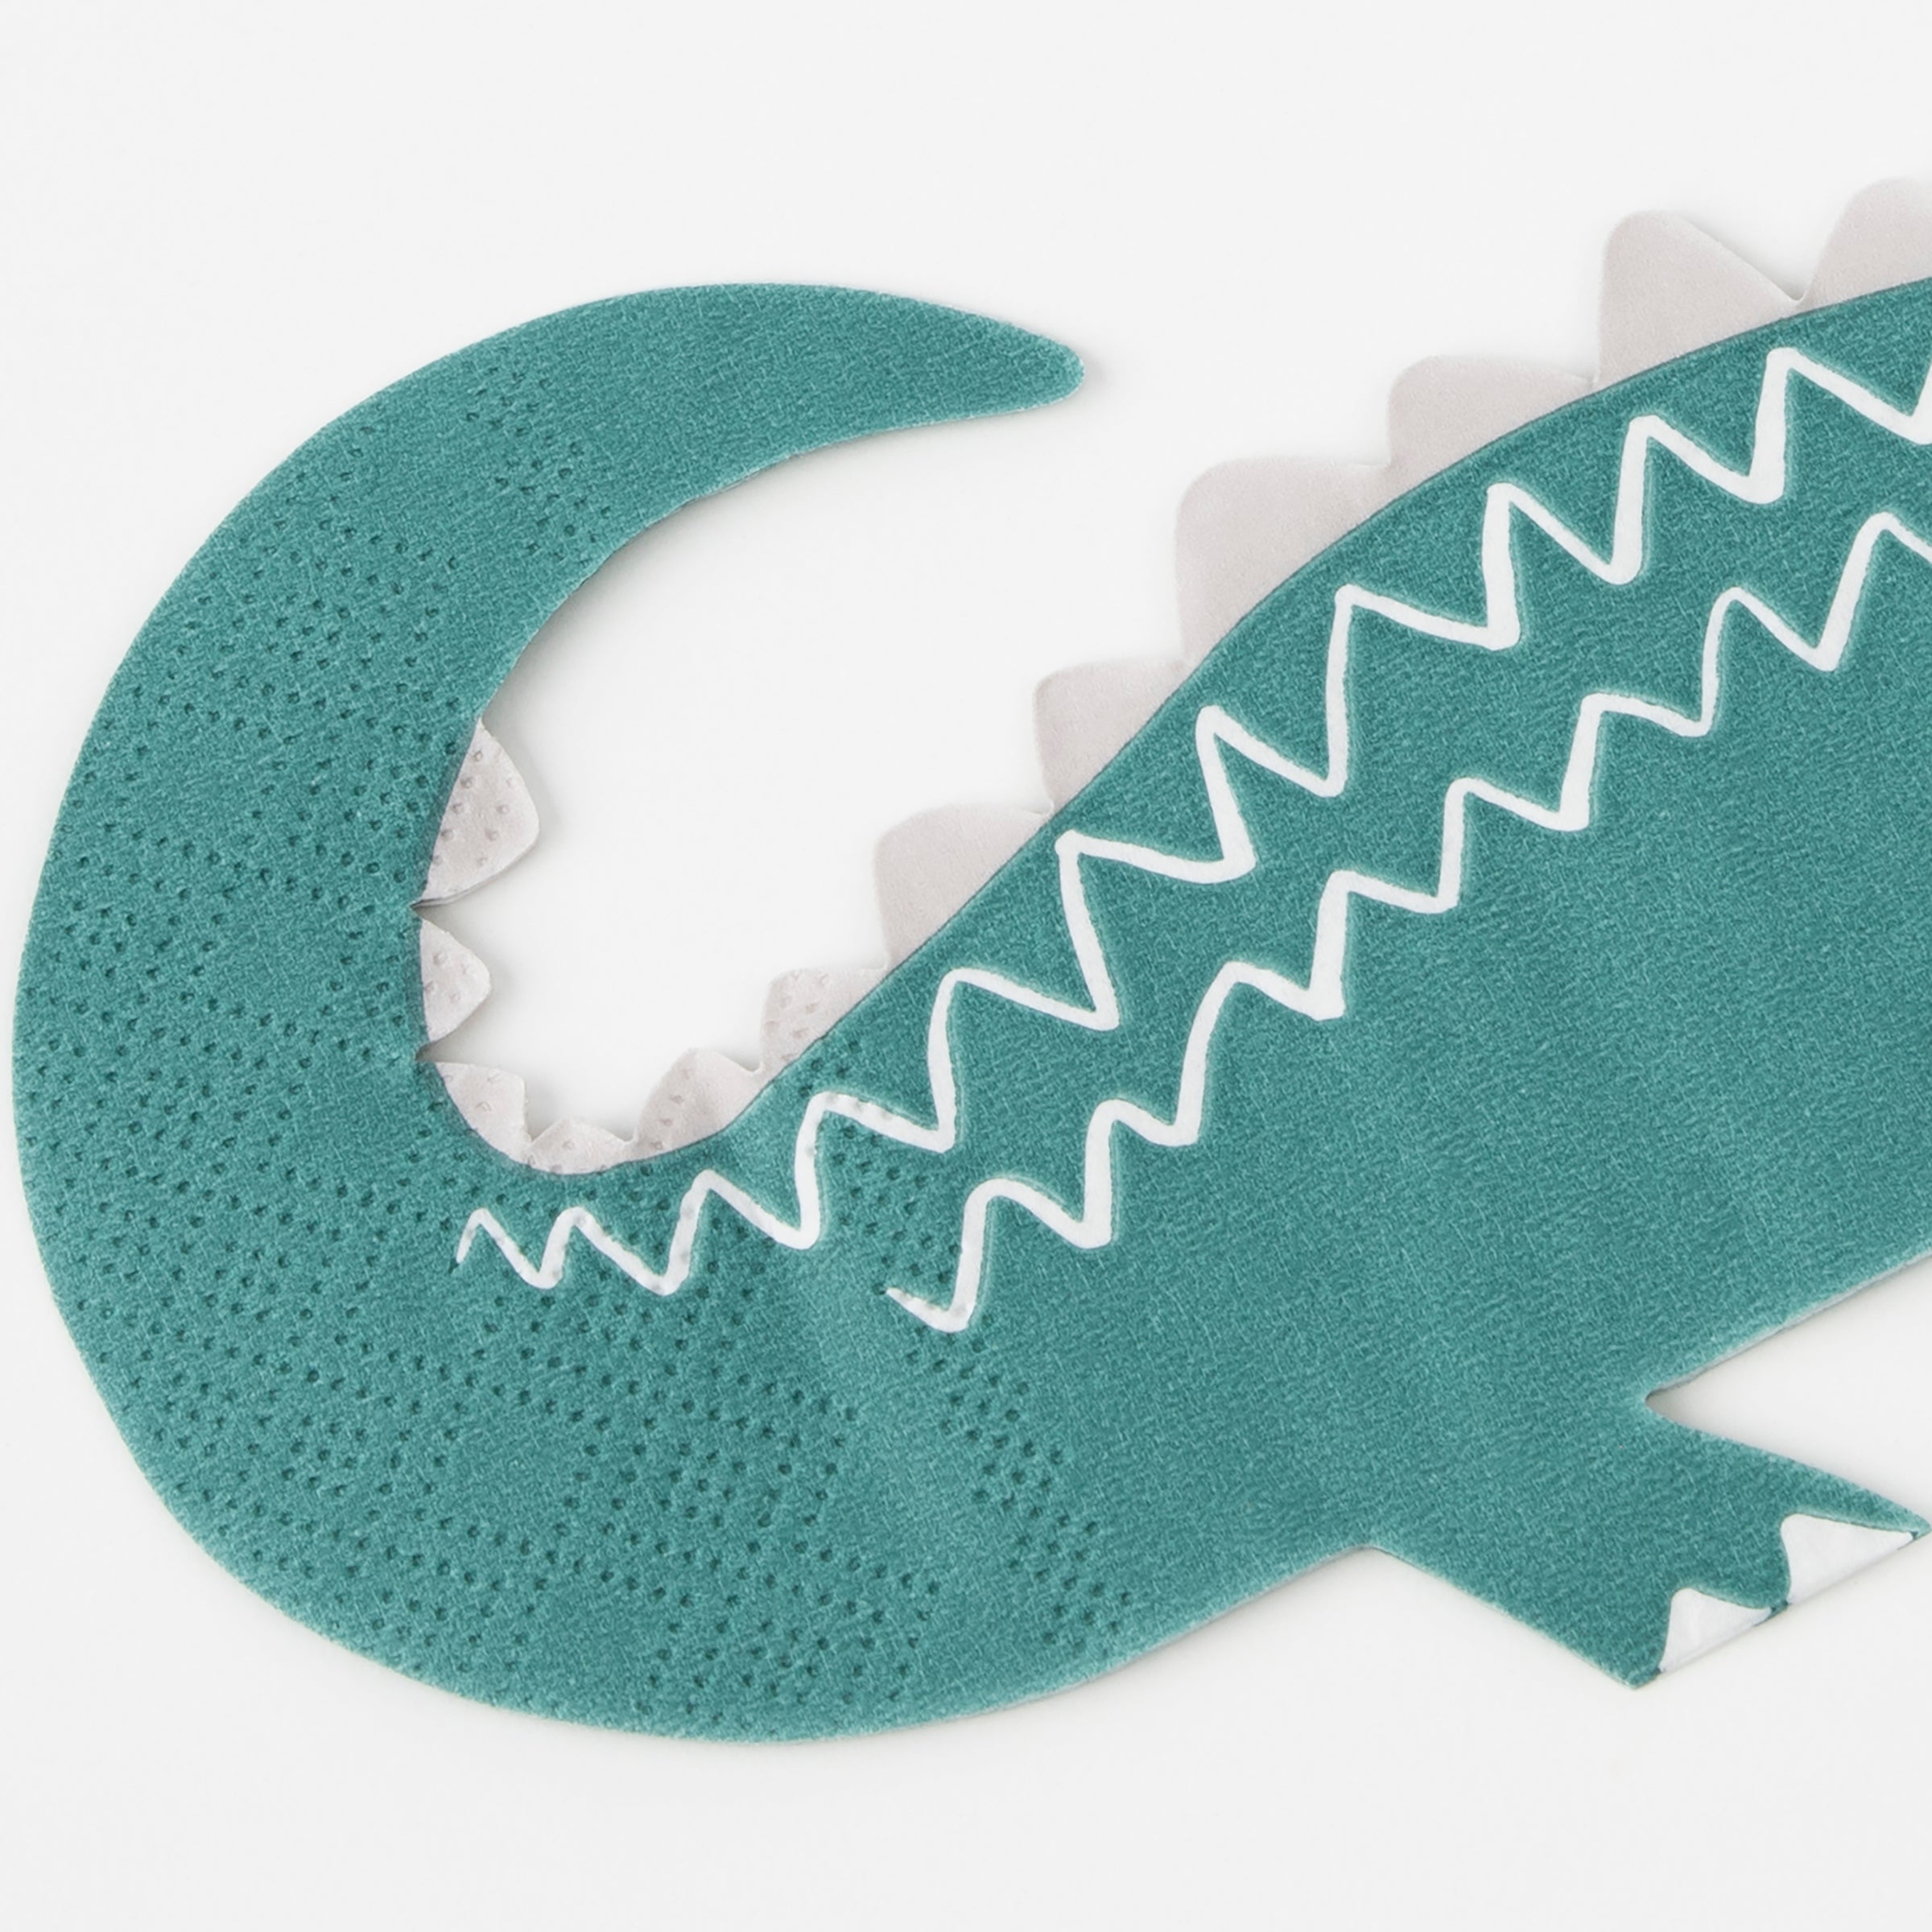 Our paper napkins, in the shape of crocodiles, are ideal for a safari birthday party.